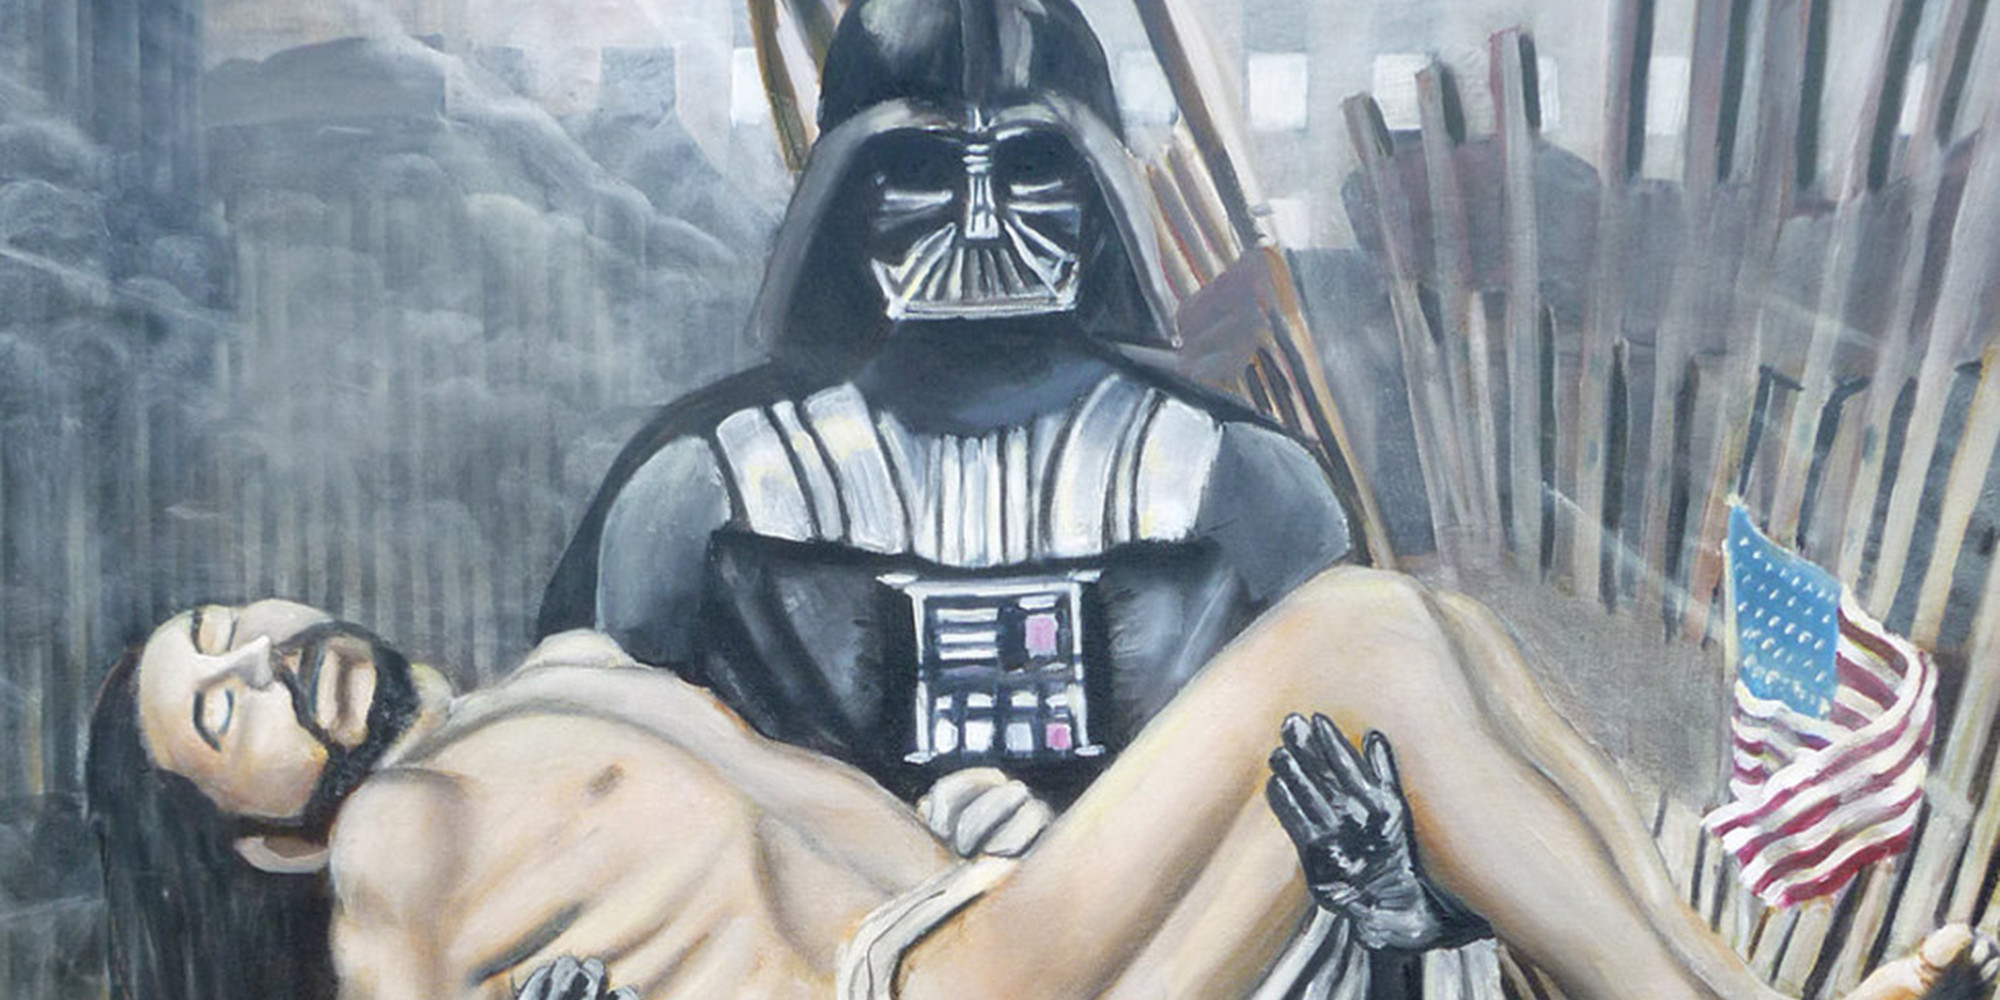 jesus darth vader painting cedric chambers selling.